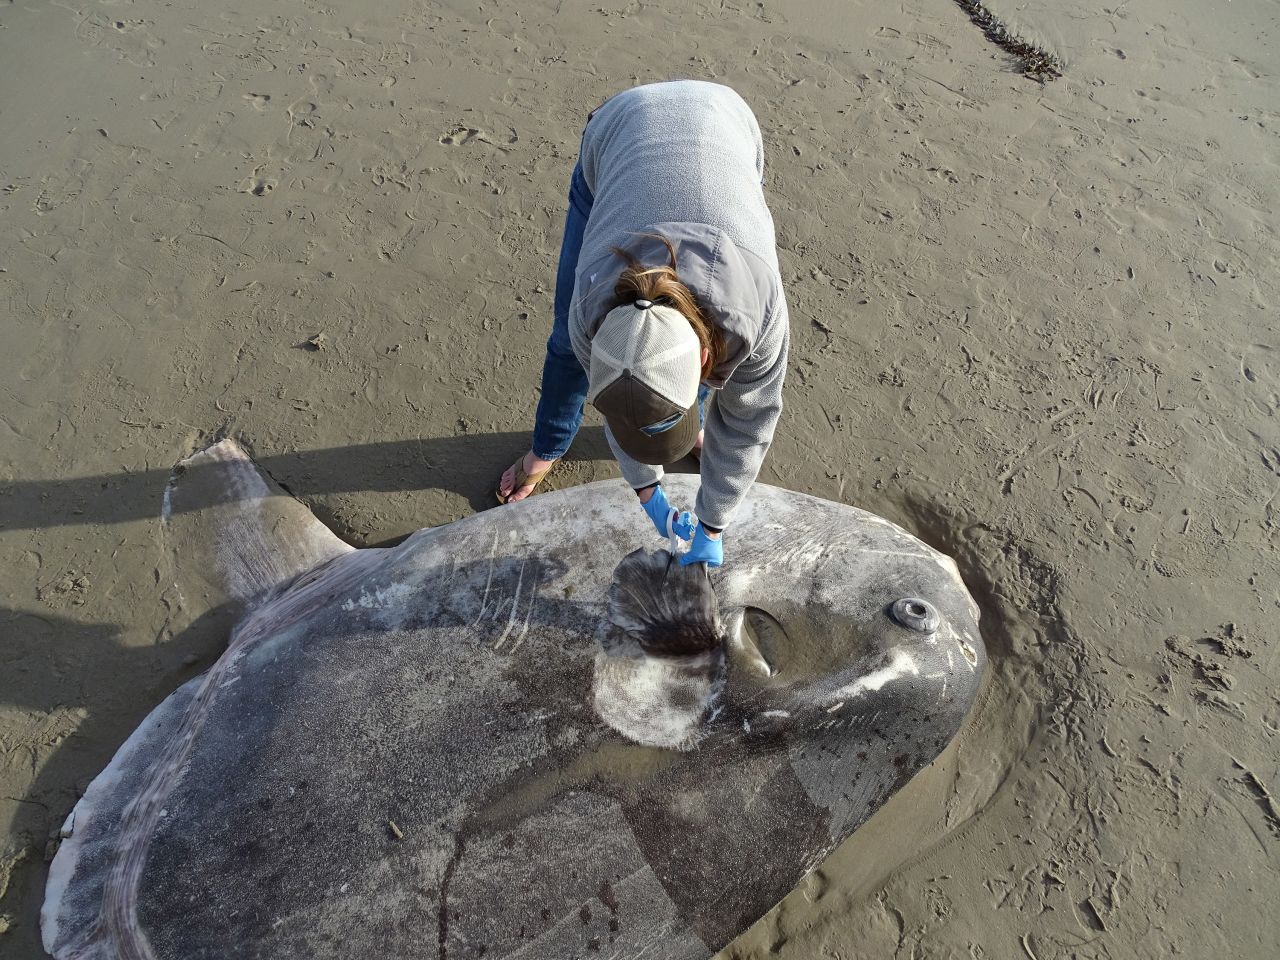 The hoodwinker sunfish was found on a beach in California.